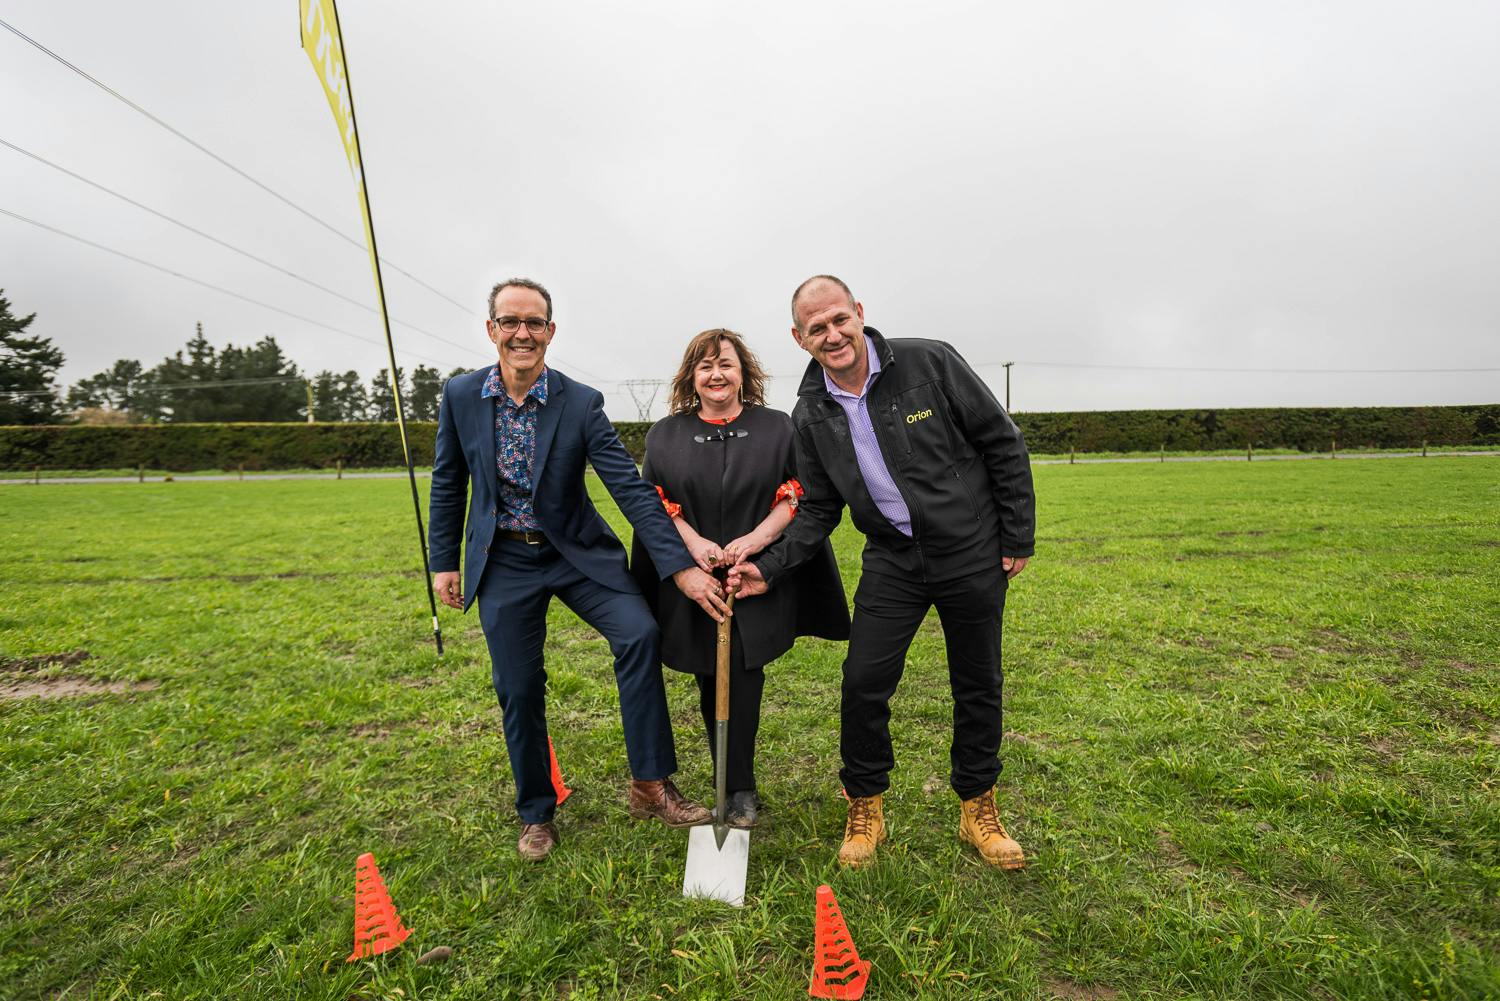 Sod-turning at the new Norwood grid exit point